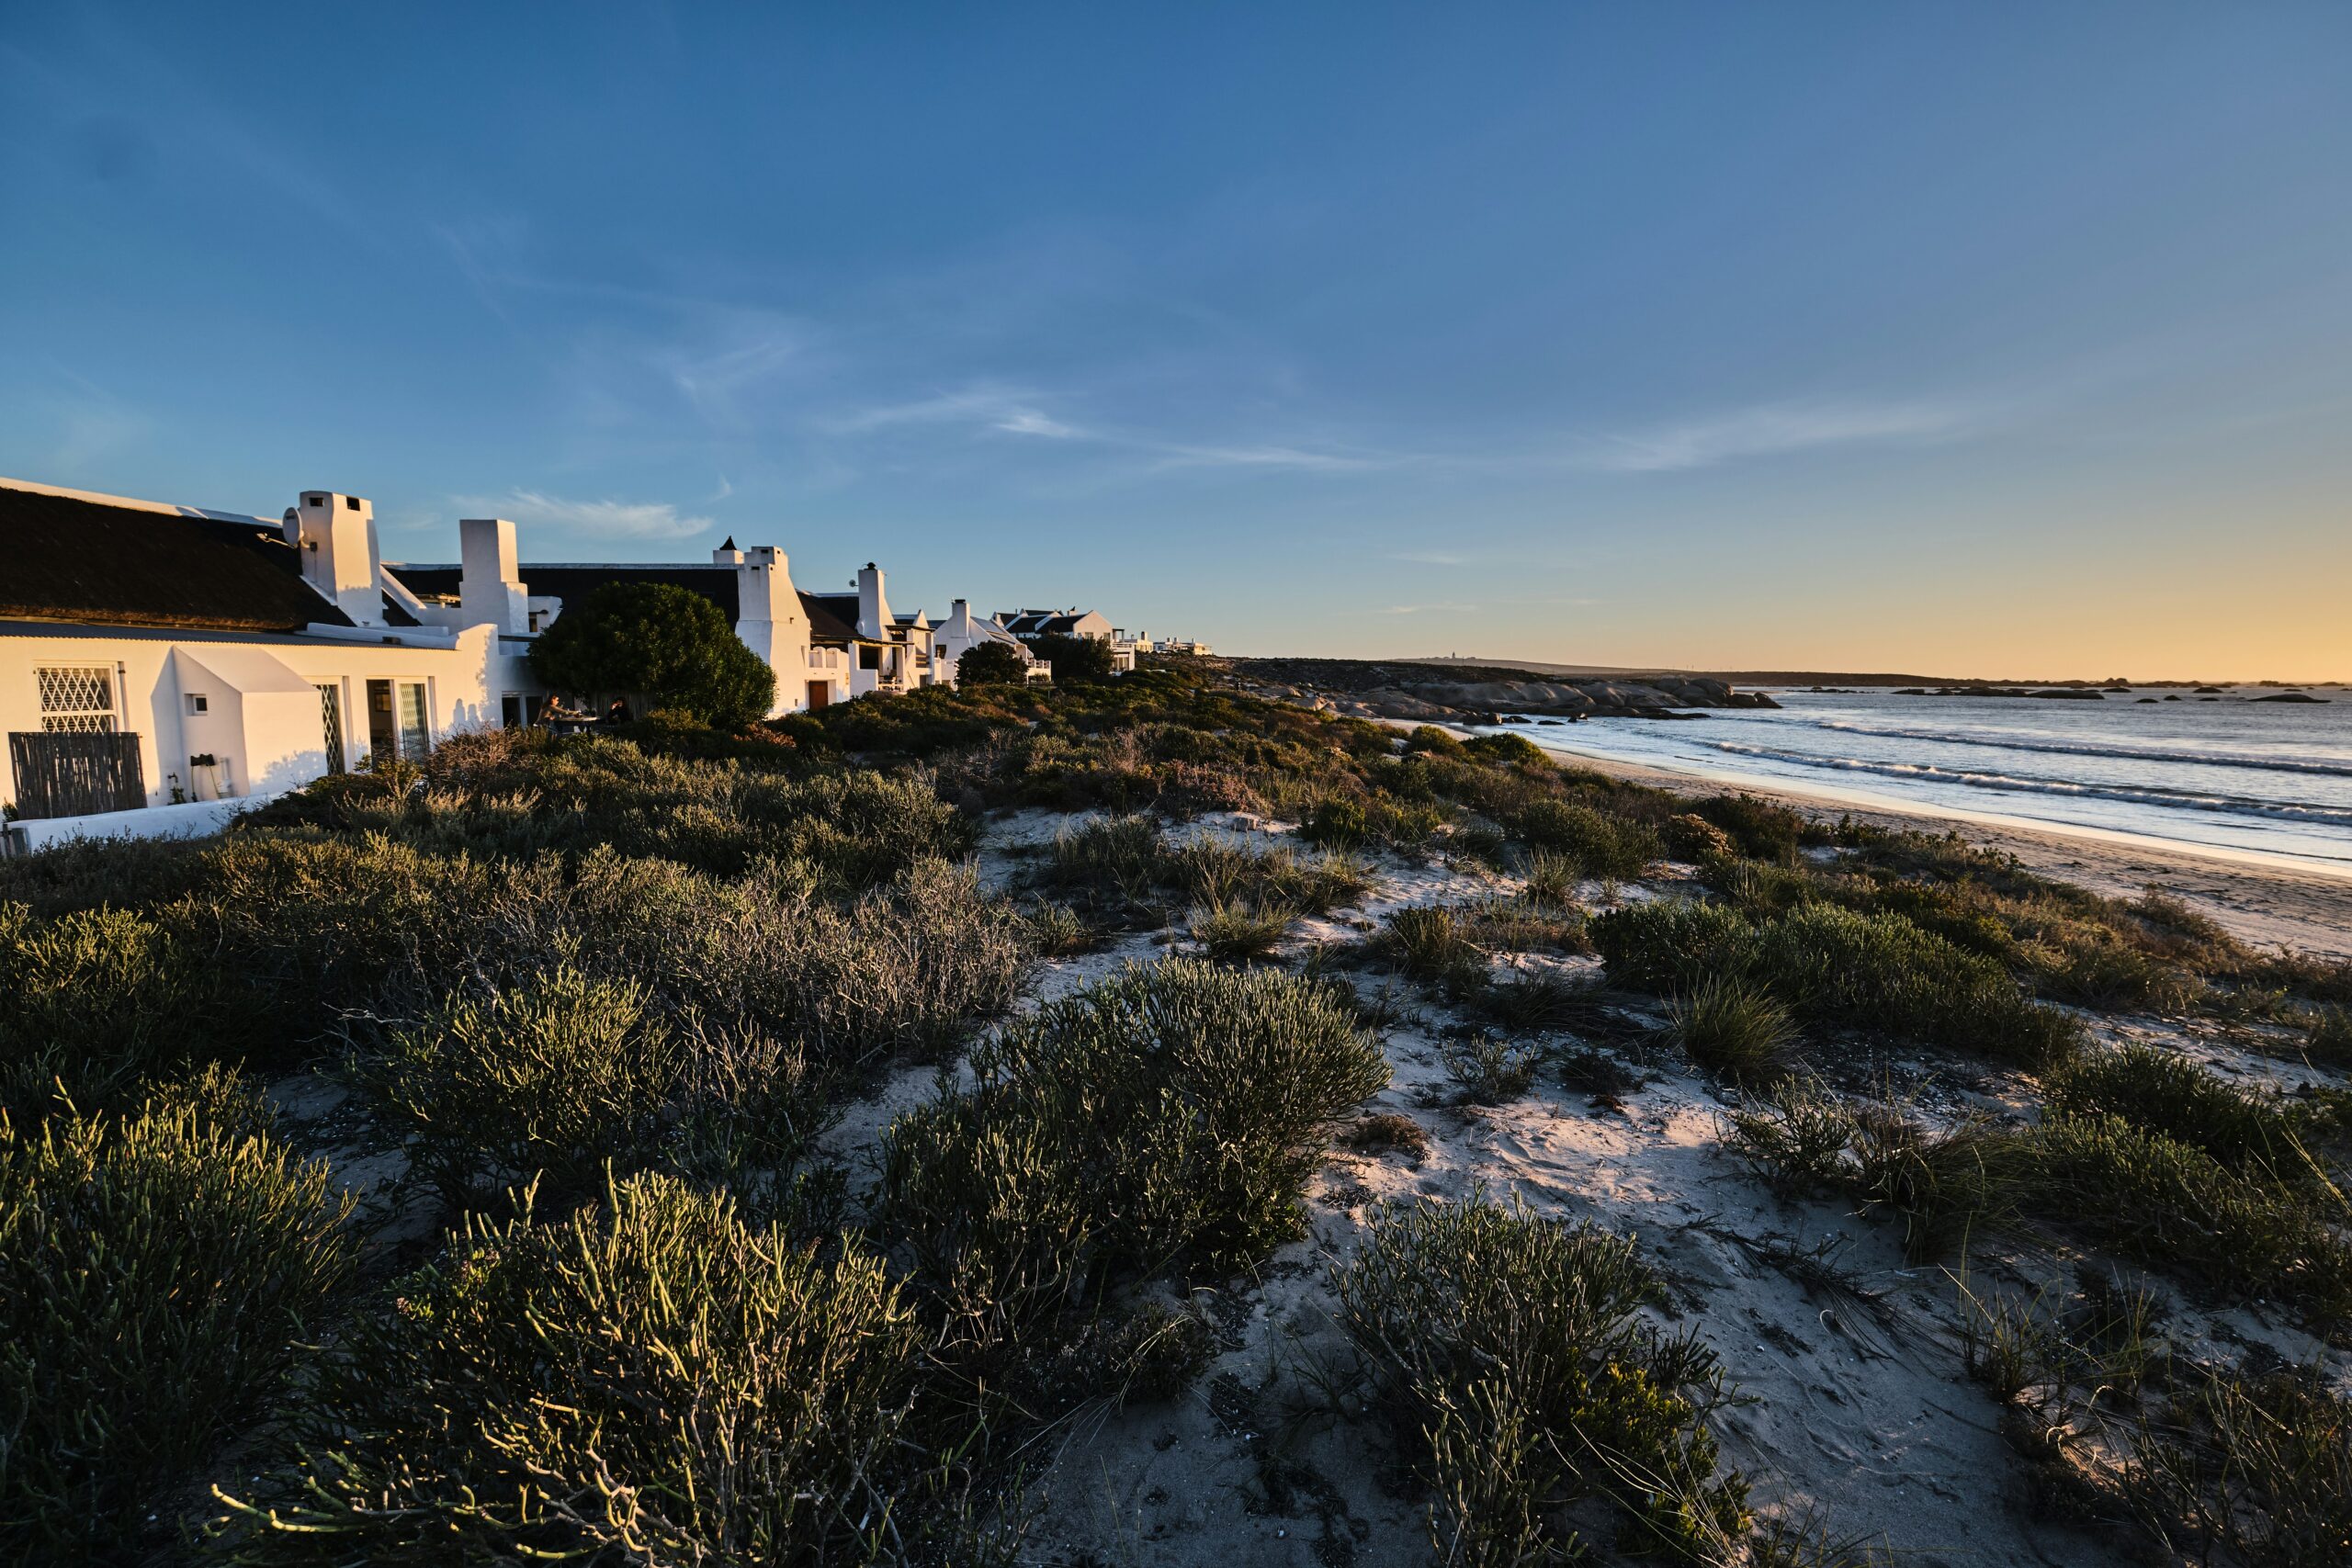 Paternoster - Where to go in South Africa